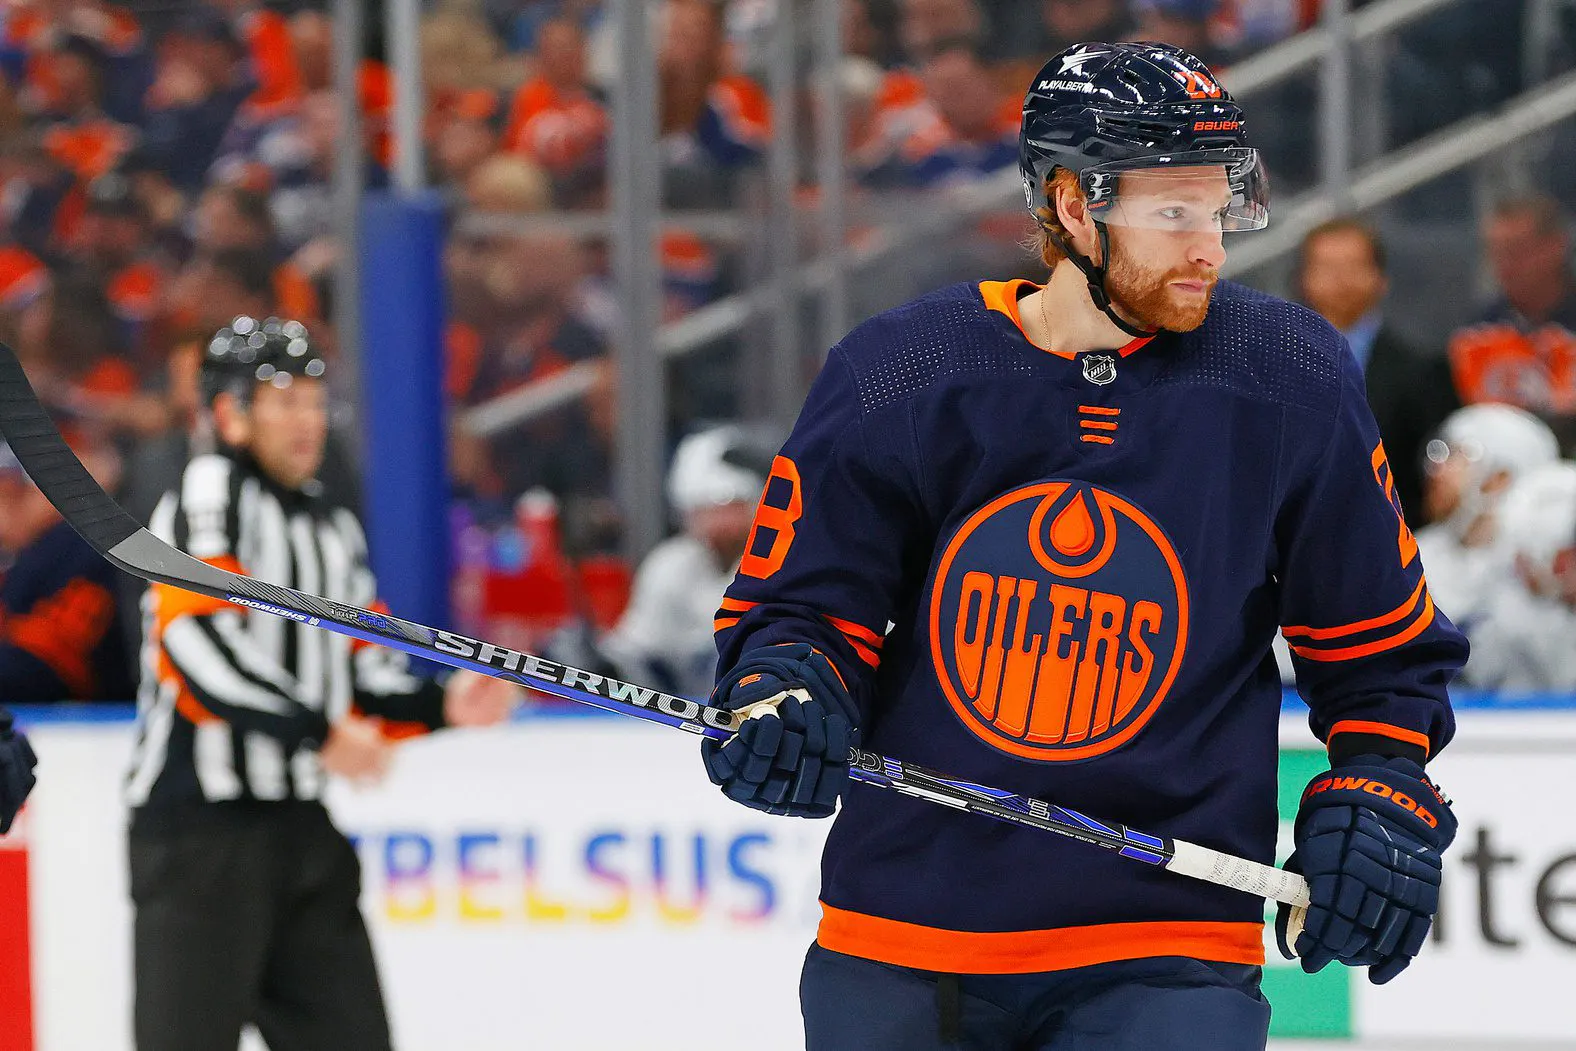 Oilers forward Connor Brown expected to be scratched for Thursday’s game against Devils